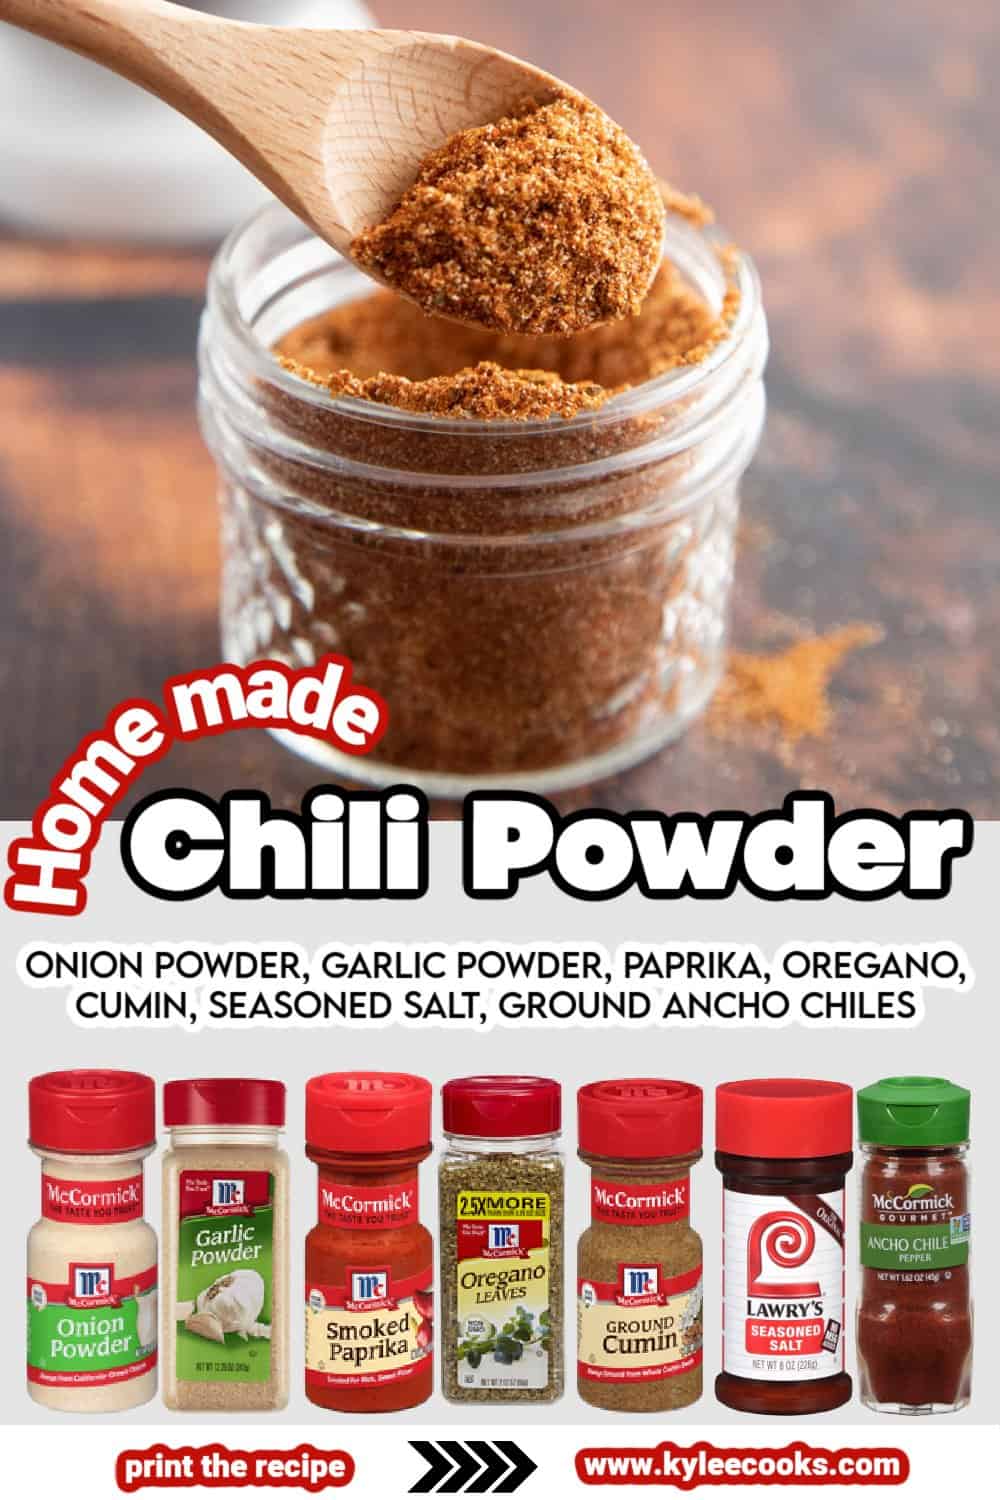 chili powder recipe with ingredients and text overlaid